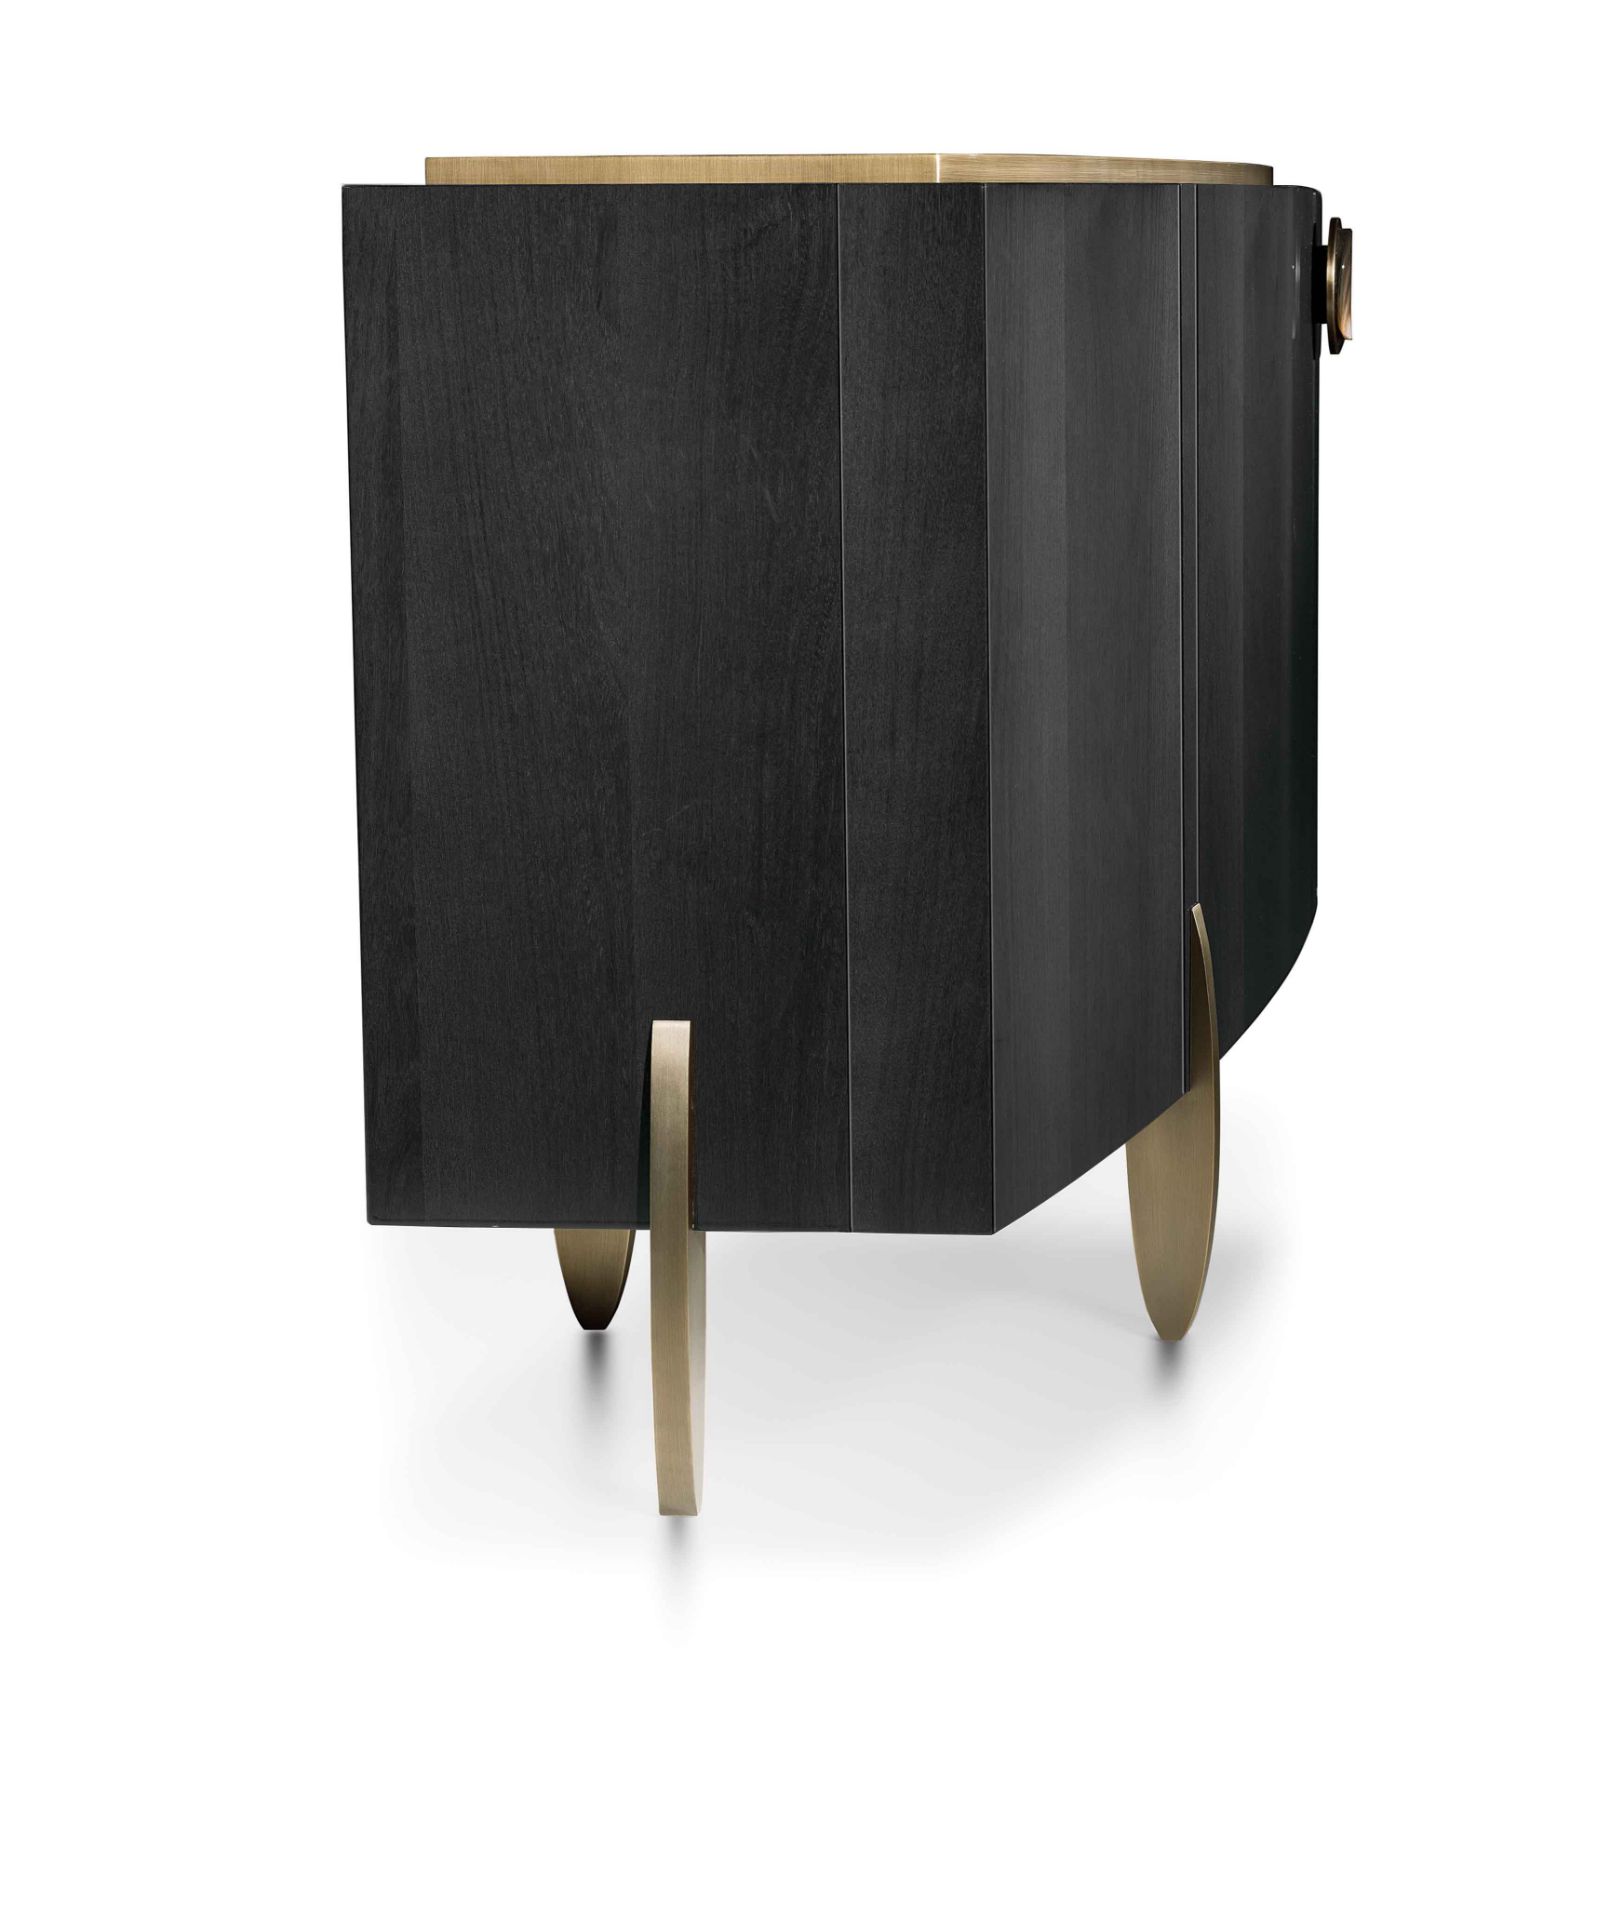 Fashion Affair Large Sideboard by Telemaco for Malerba The Buffet, for the living room, is shaped by - Image 7 of 25